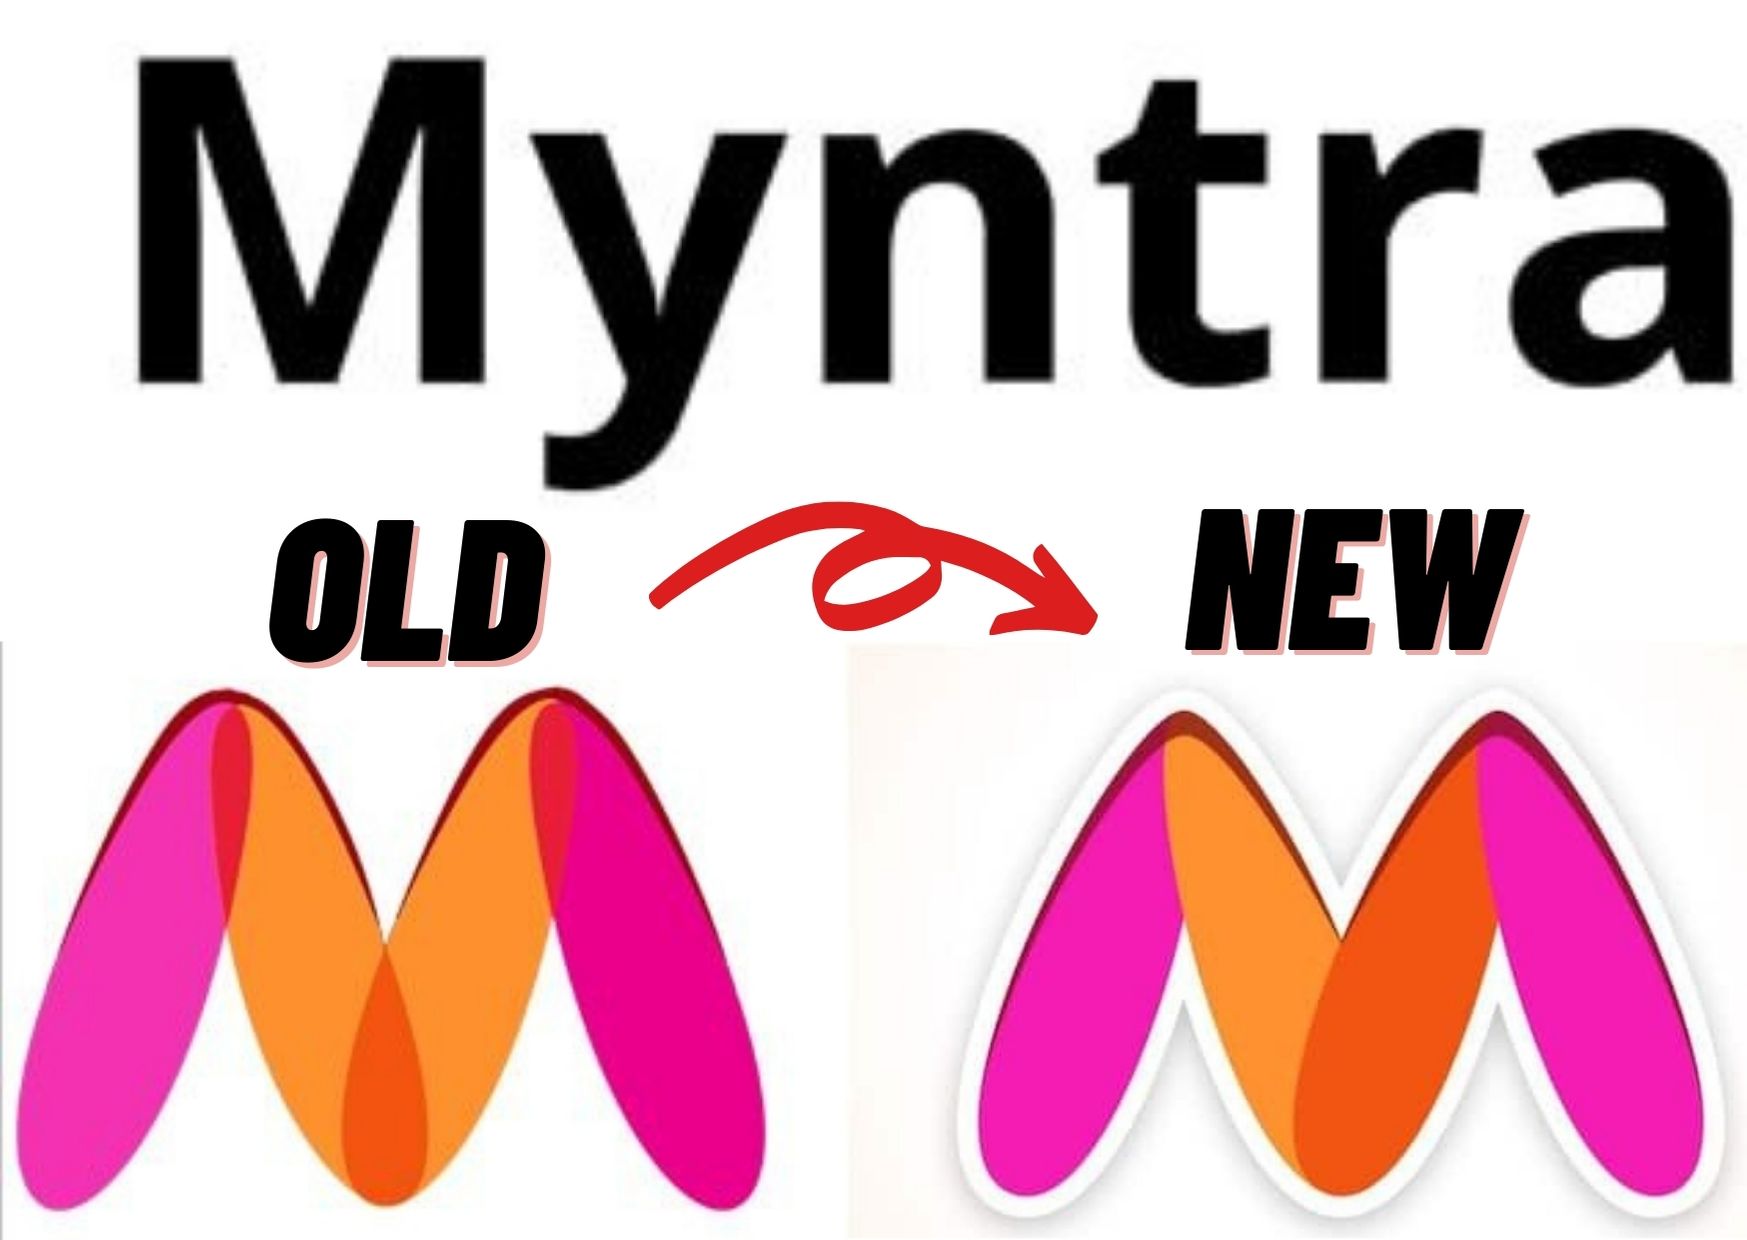  Myntra  Logo Change Now What is wrong with Myntra  logo 